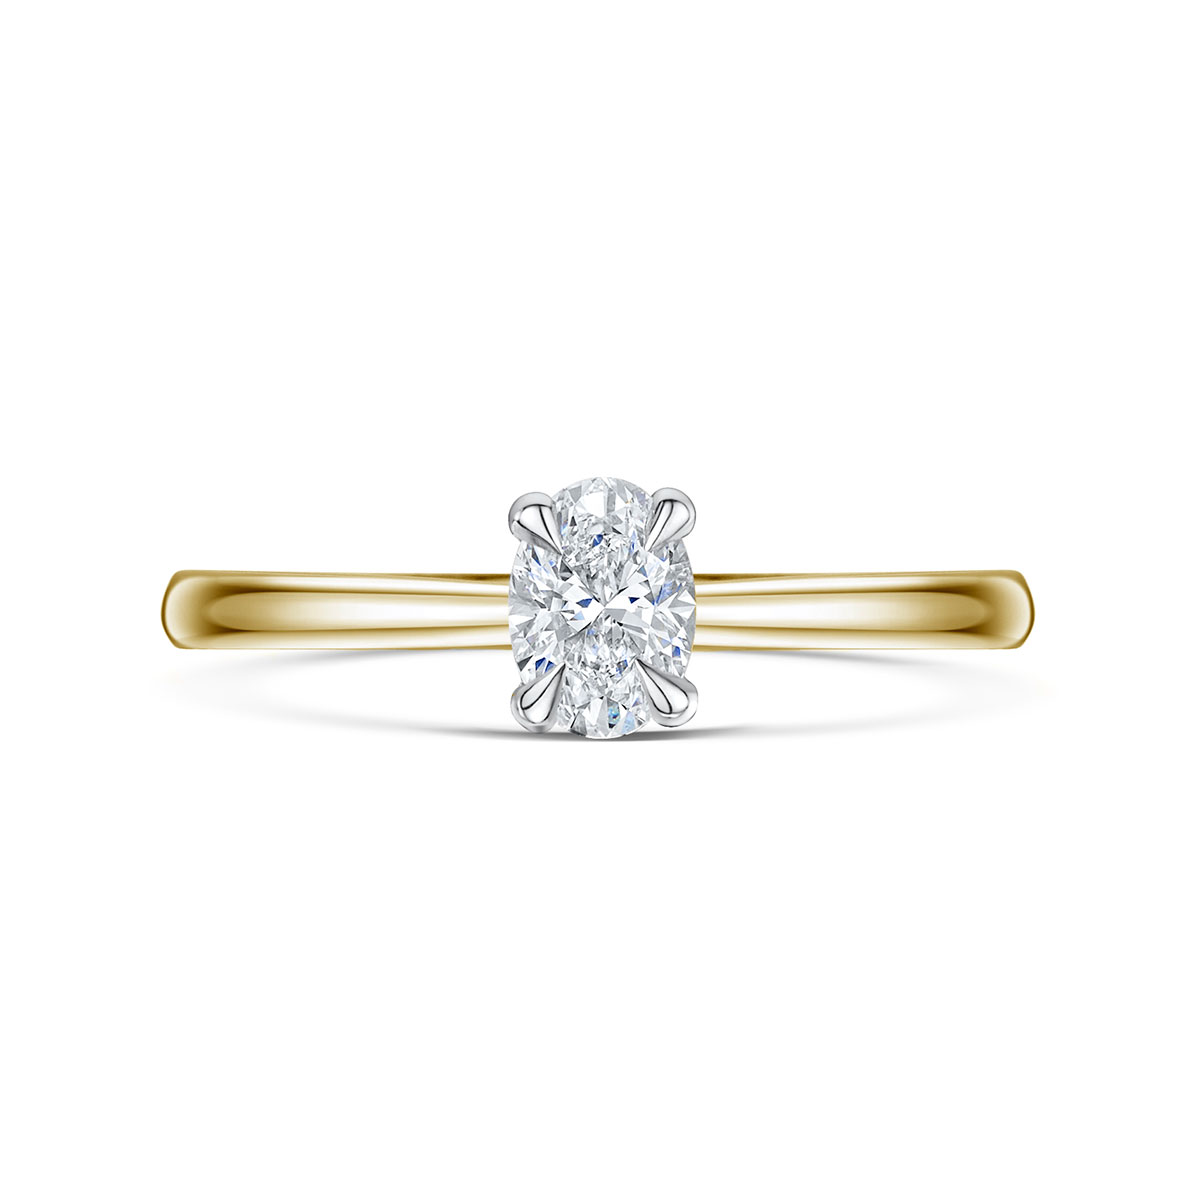 Honour Oval Solitaire Diamond Ring in Yellow Gold